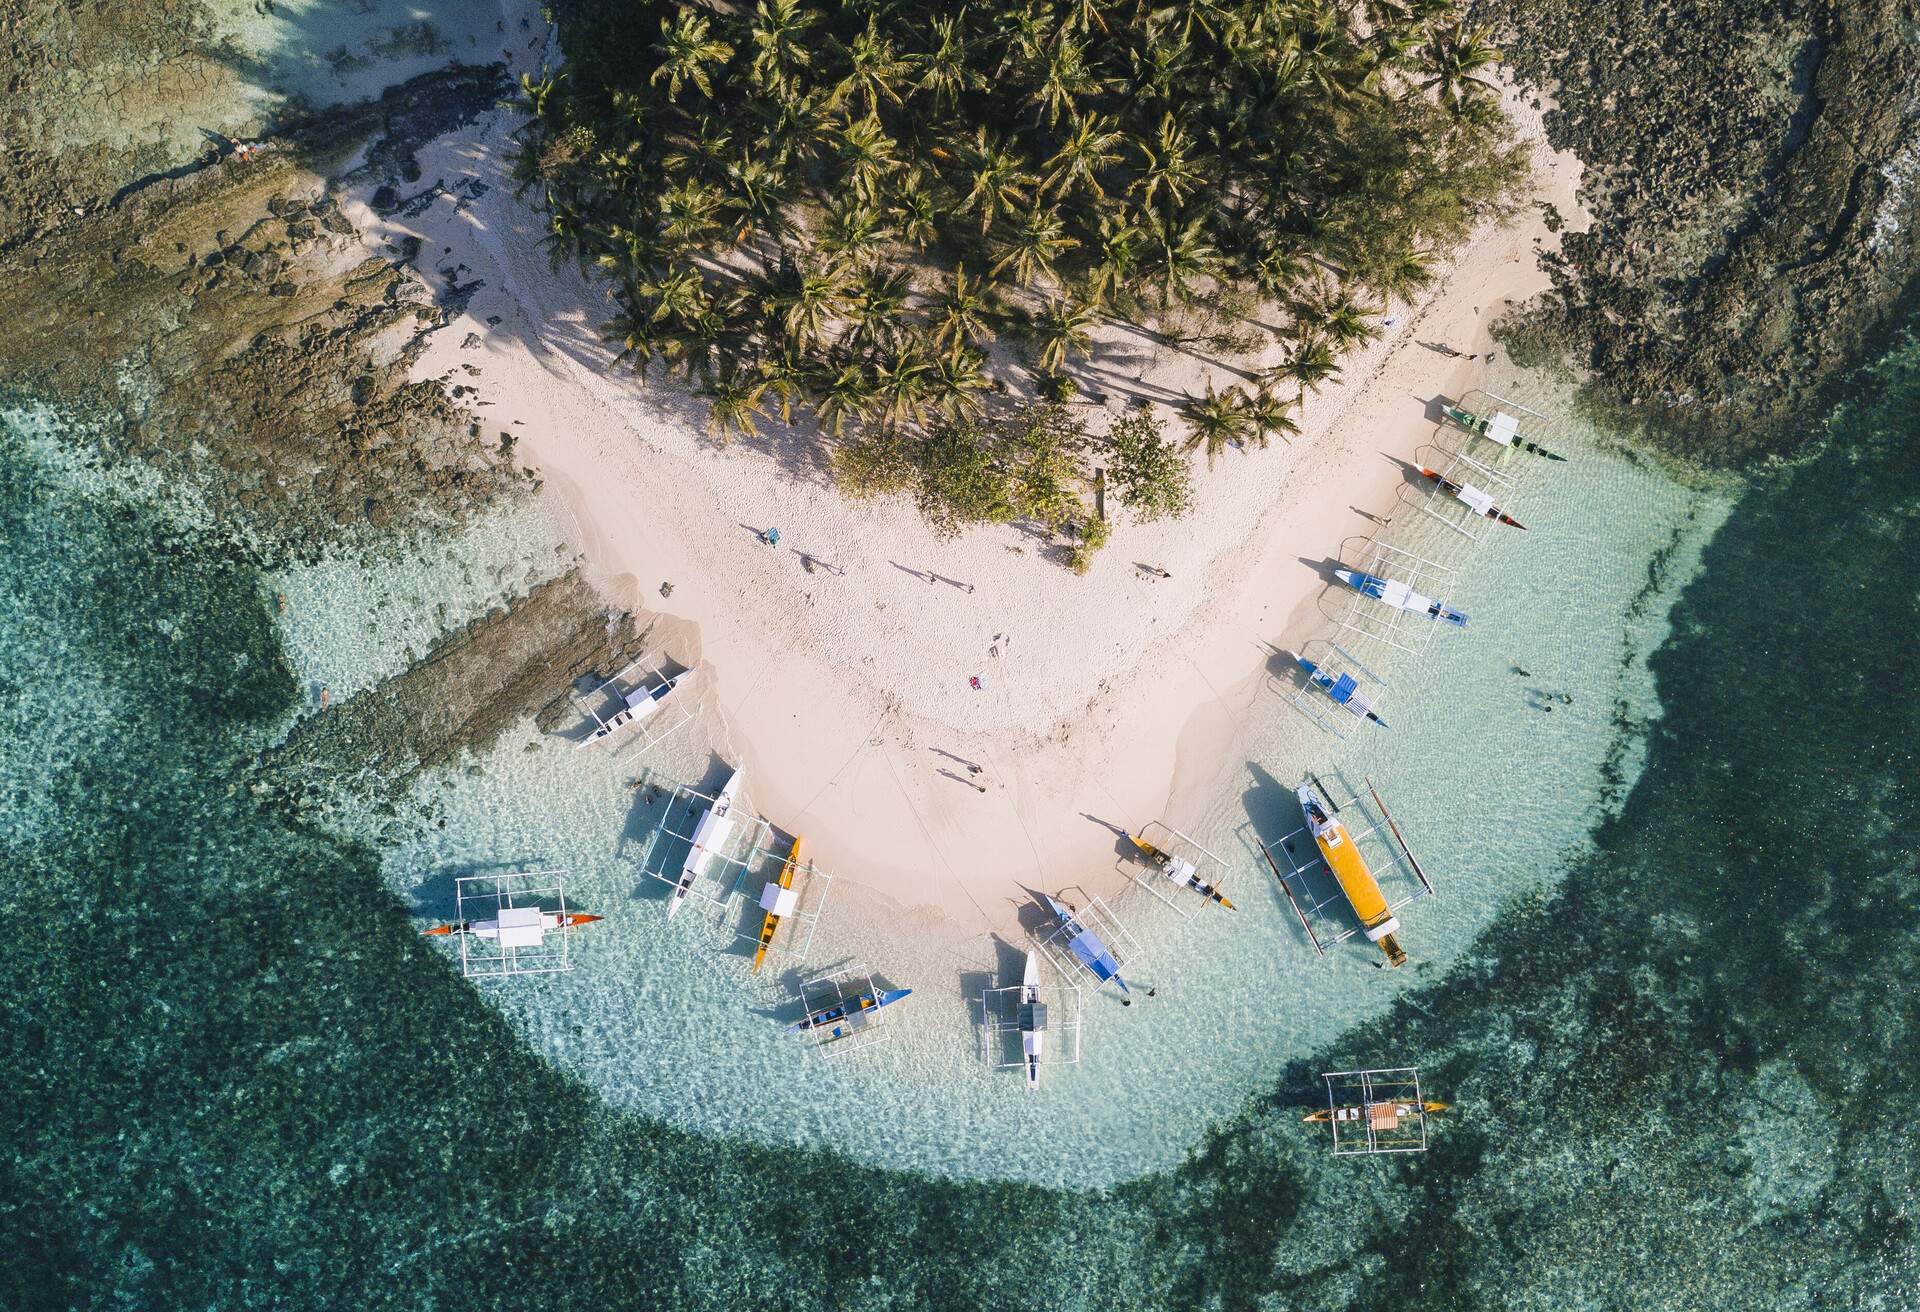 Drone view of Siargao island with palm trees on beach surrounded by boats, Philippines